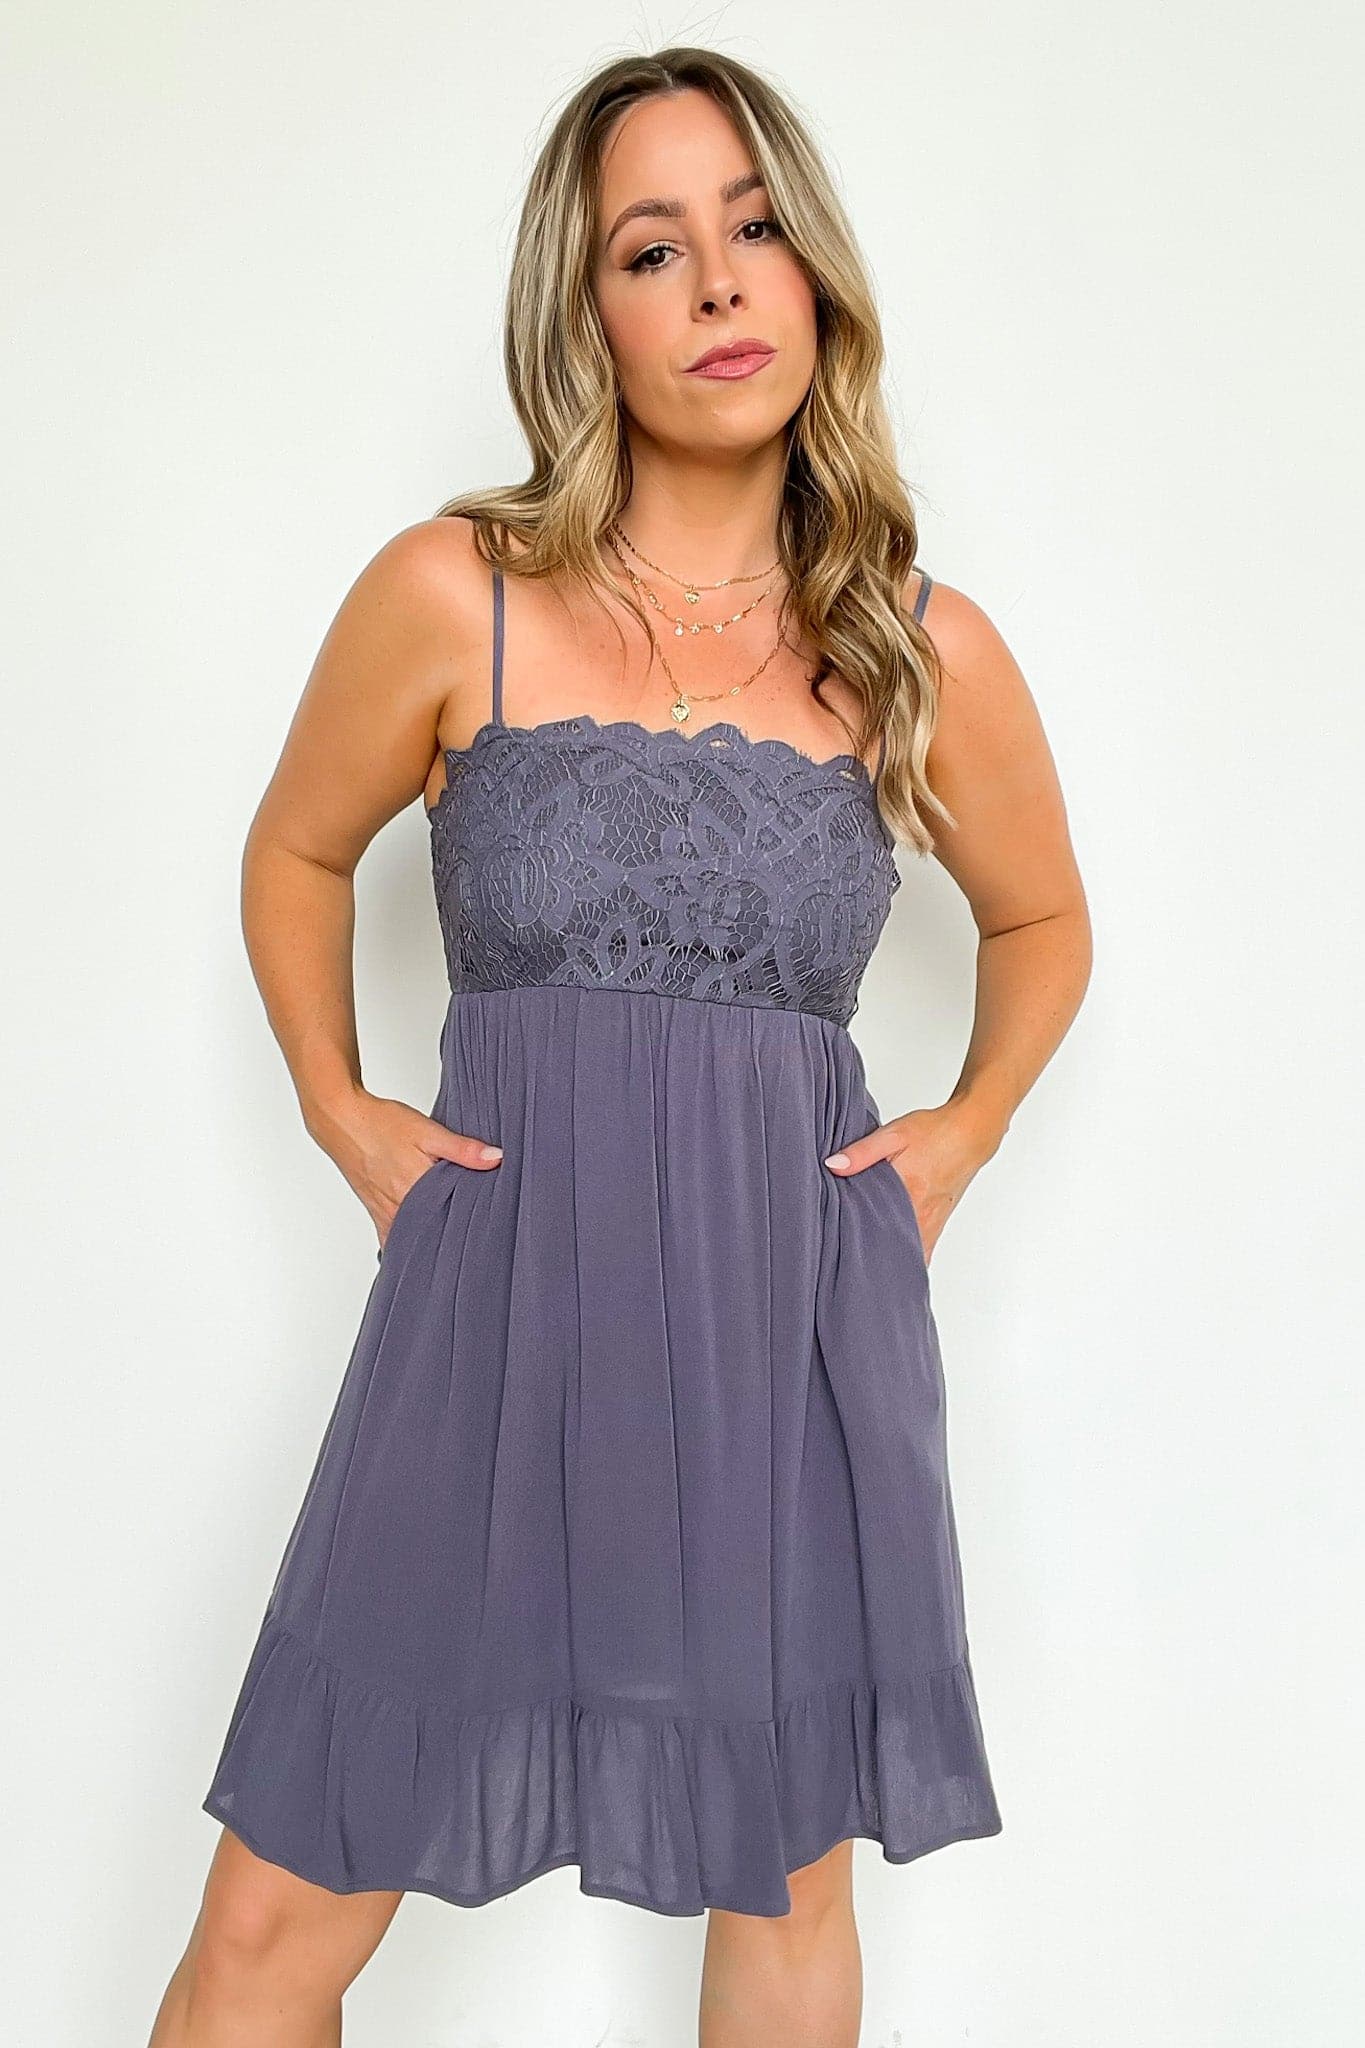  Easy Attention Lace Bodice Ruffle Dress - FINAL SALE - Madison and Mallory